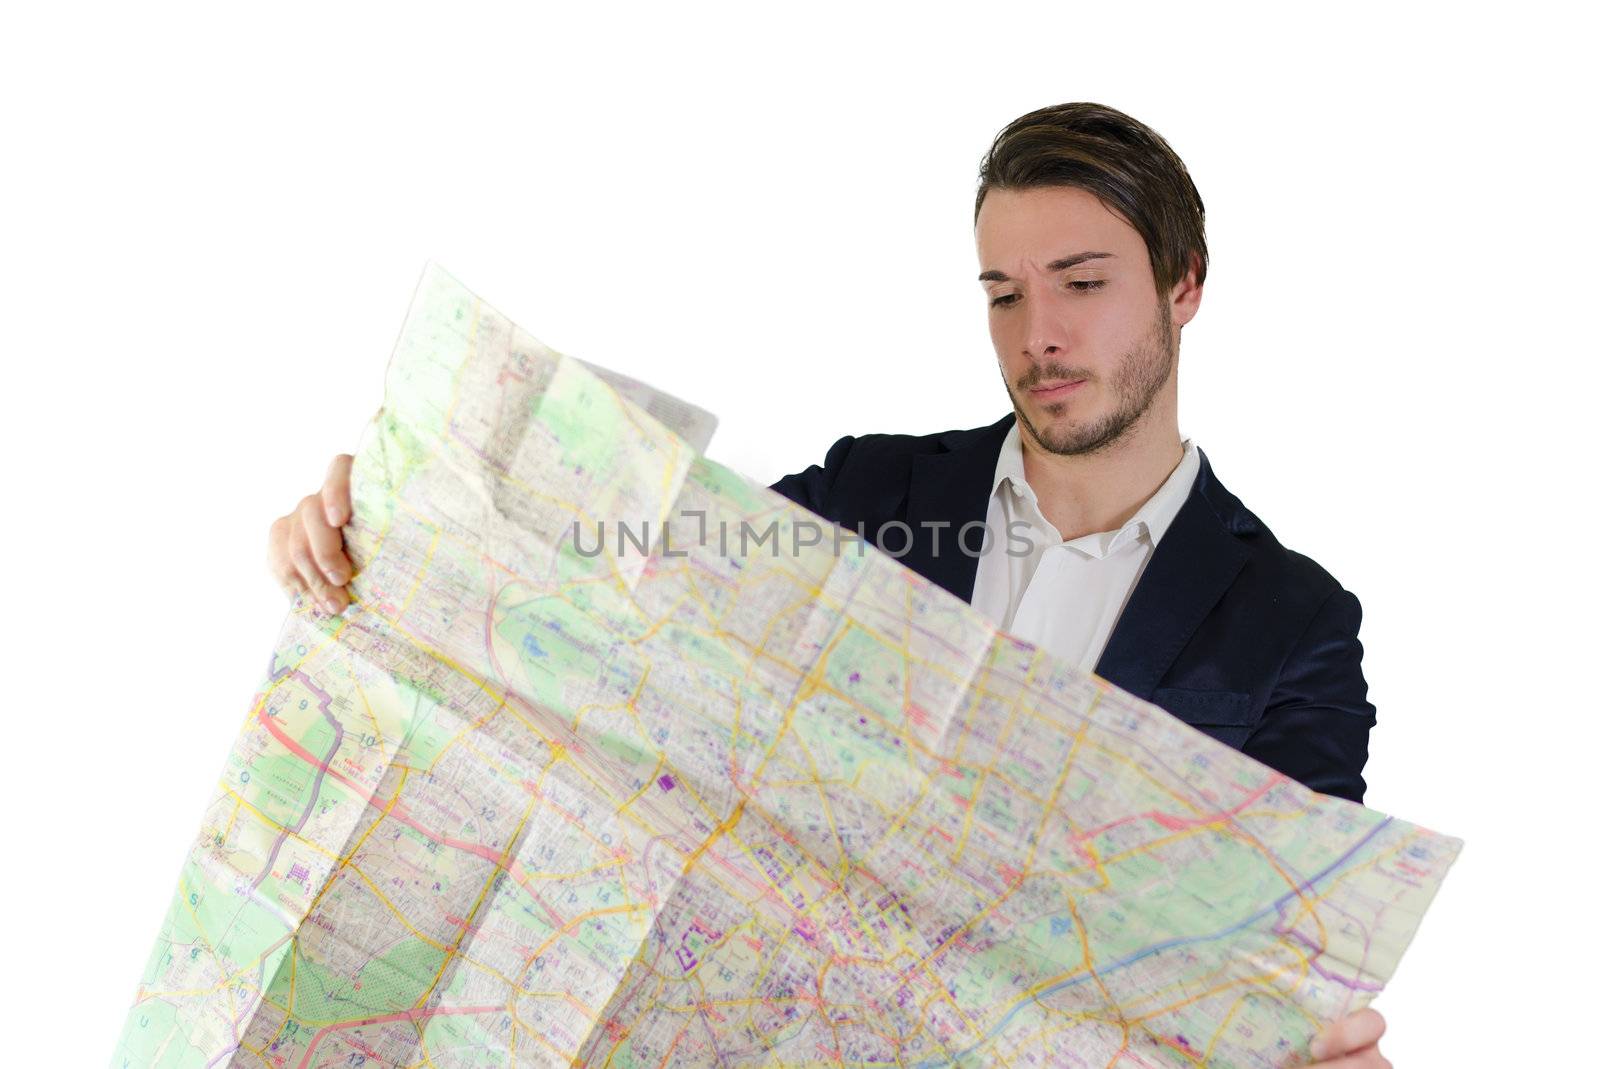 Young man looking at city map, confused or lost by artofphoto